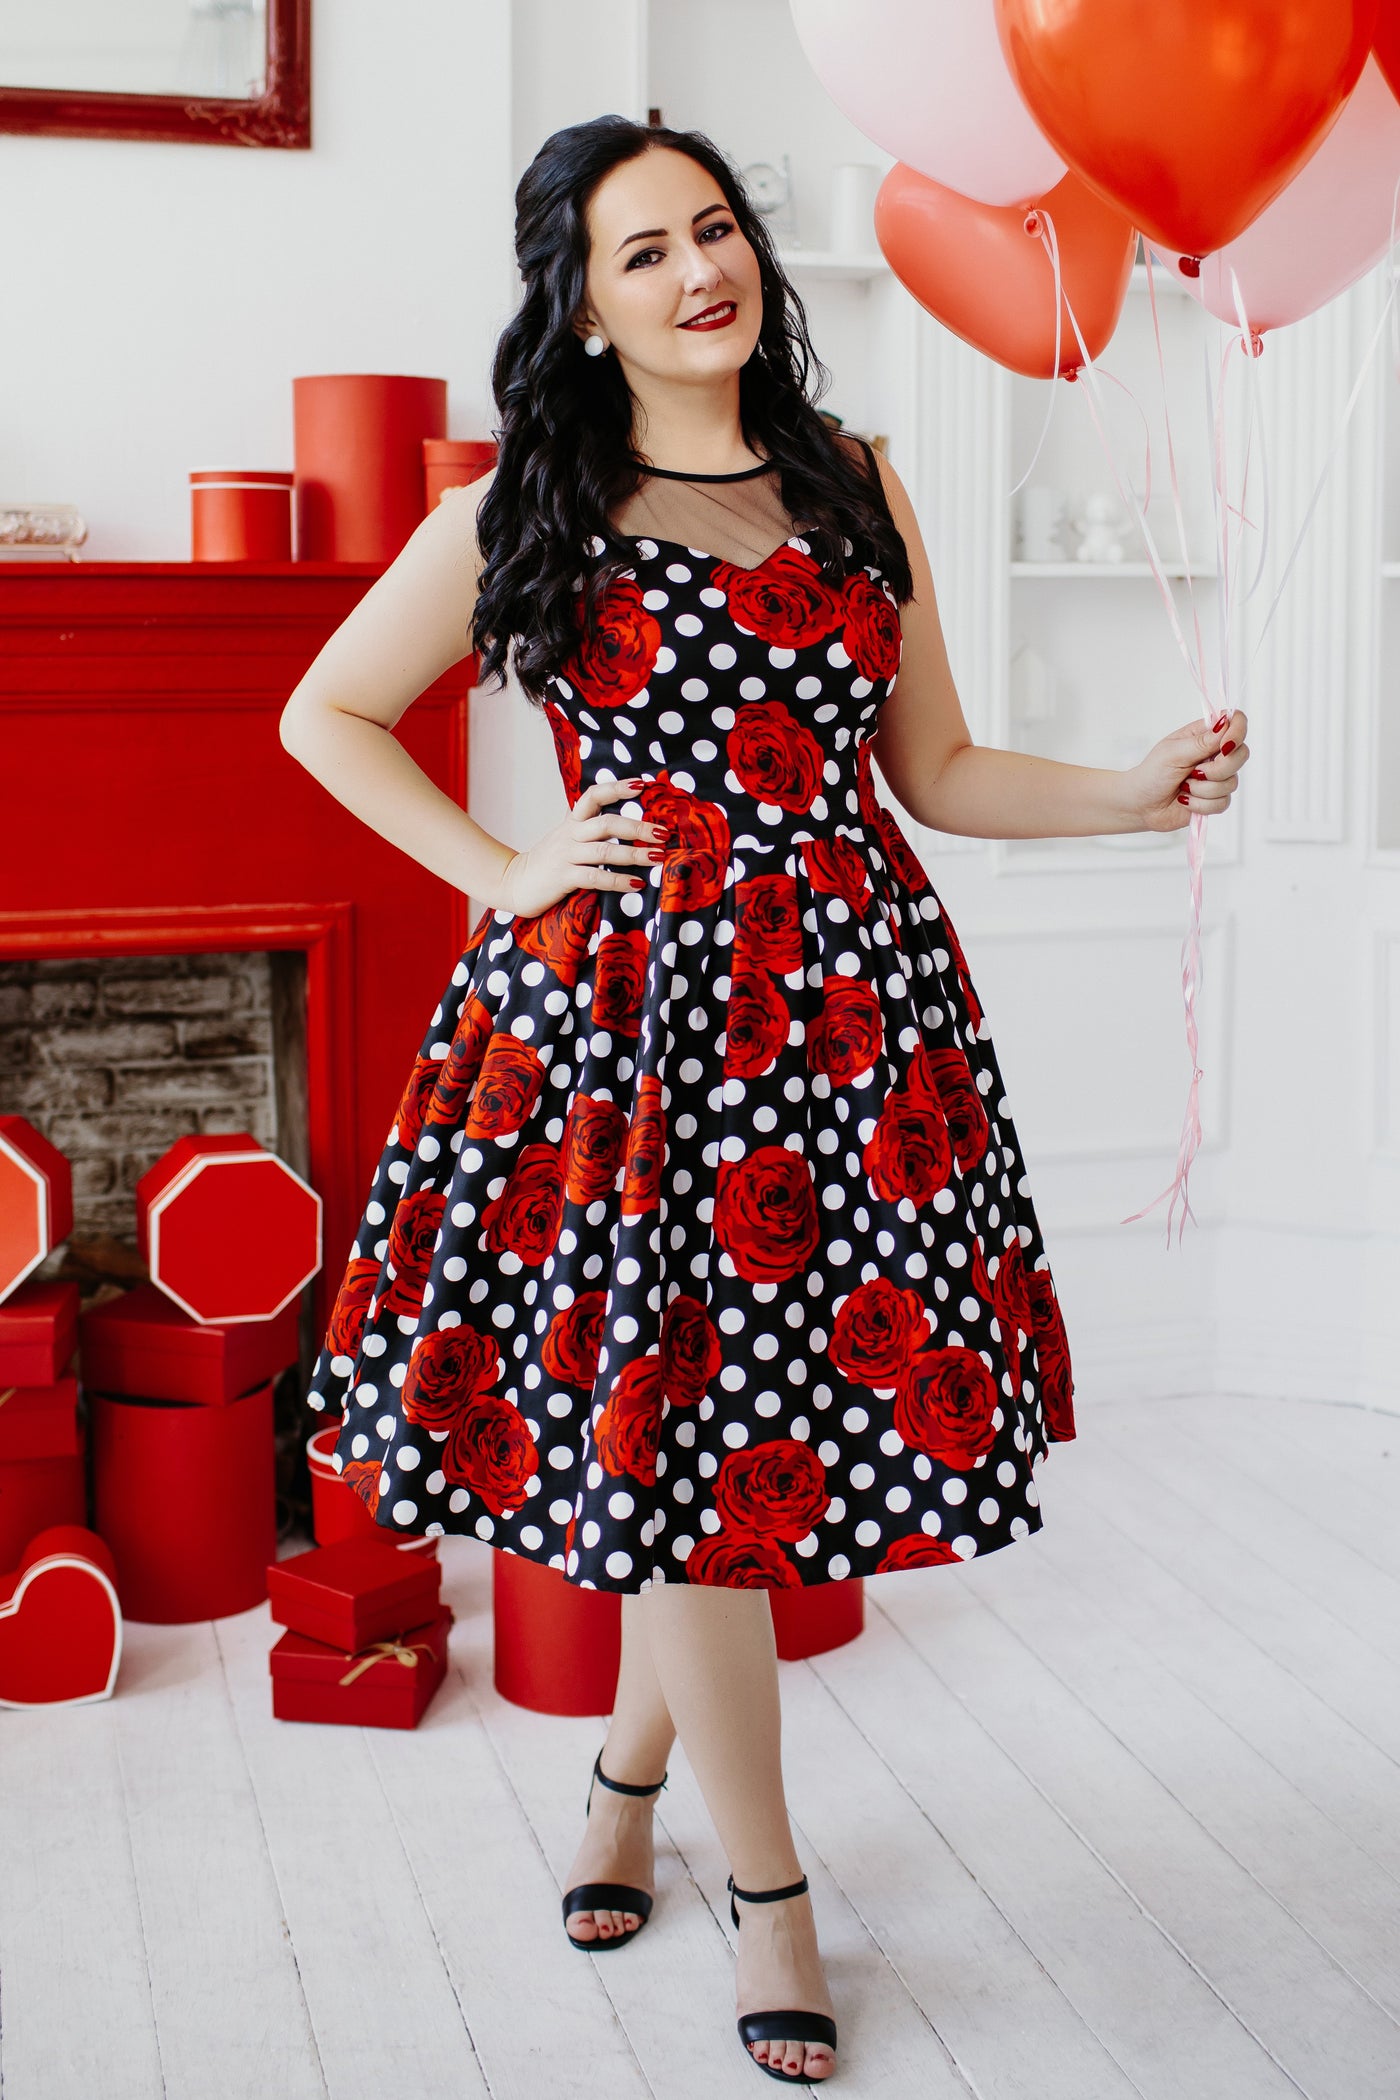 Woman wearing Vintage Style Polka Roses Party Dress in Black/Red, holding red and pink balloons